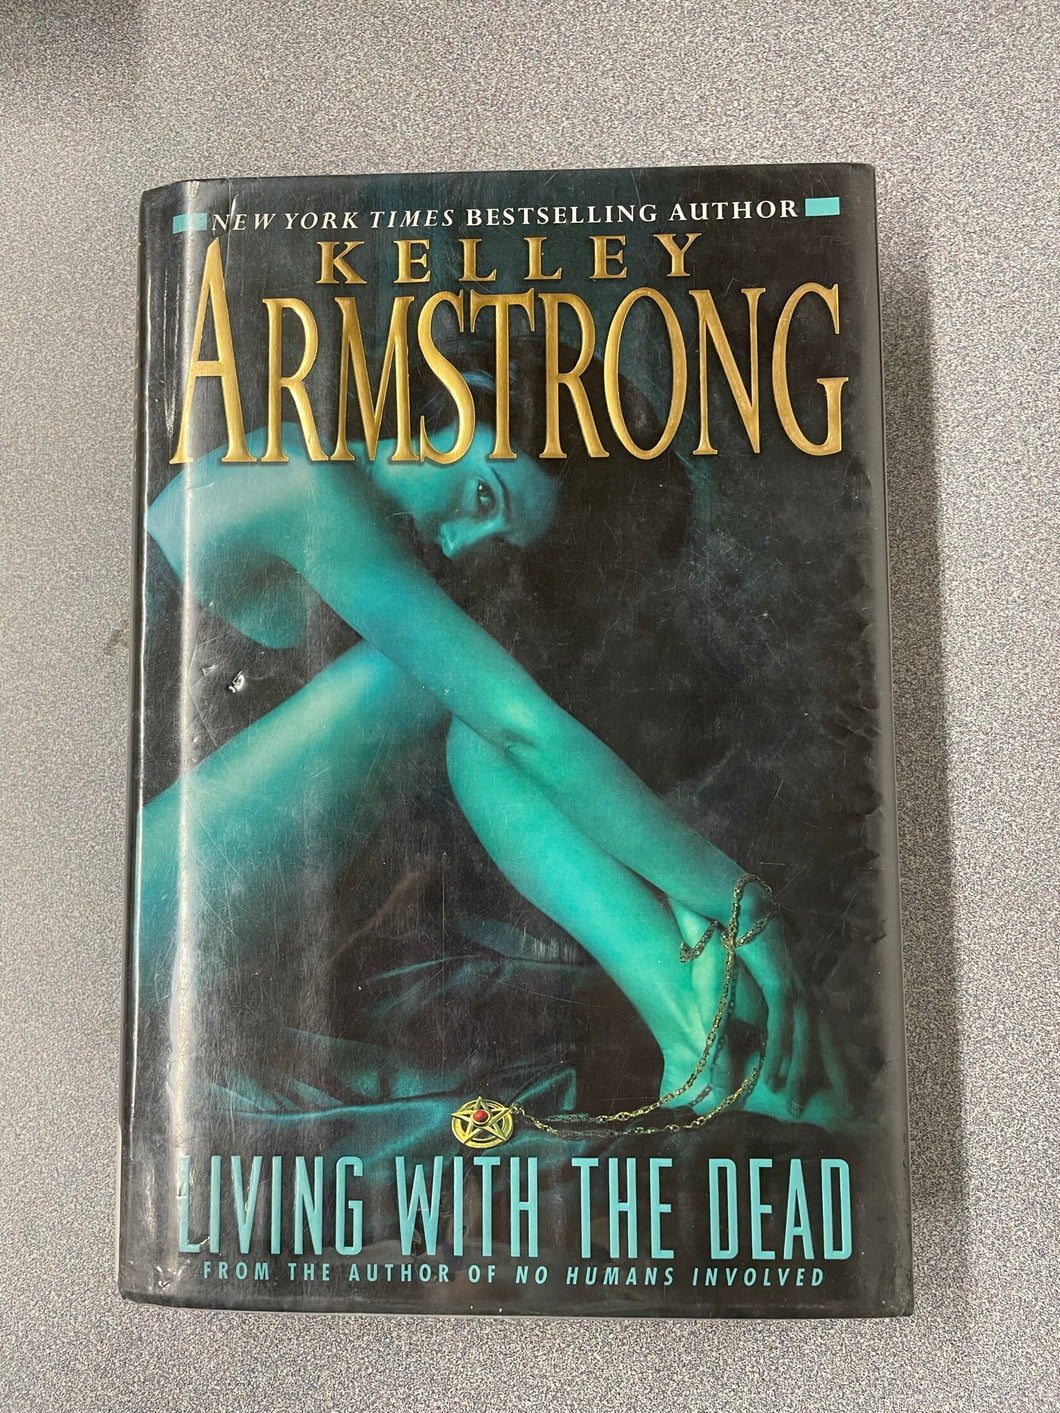 Armstrong, Kelley, Living With The Dead [2008] SF 9/23